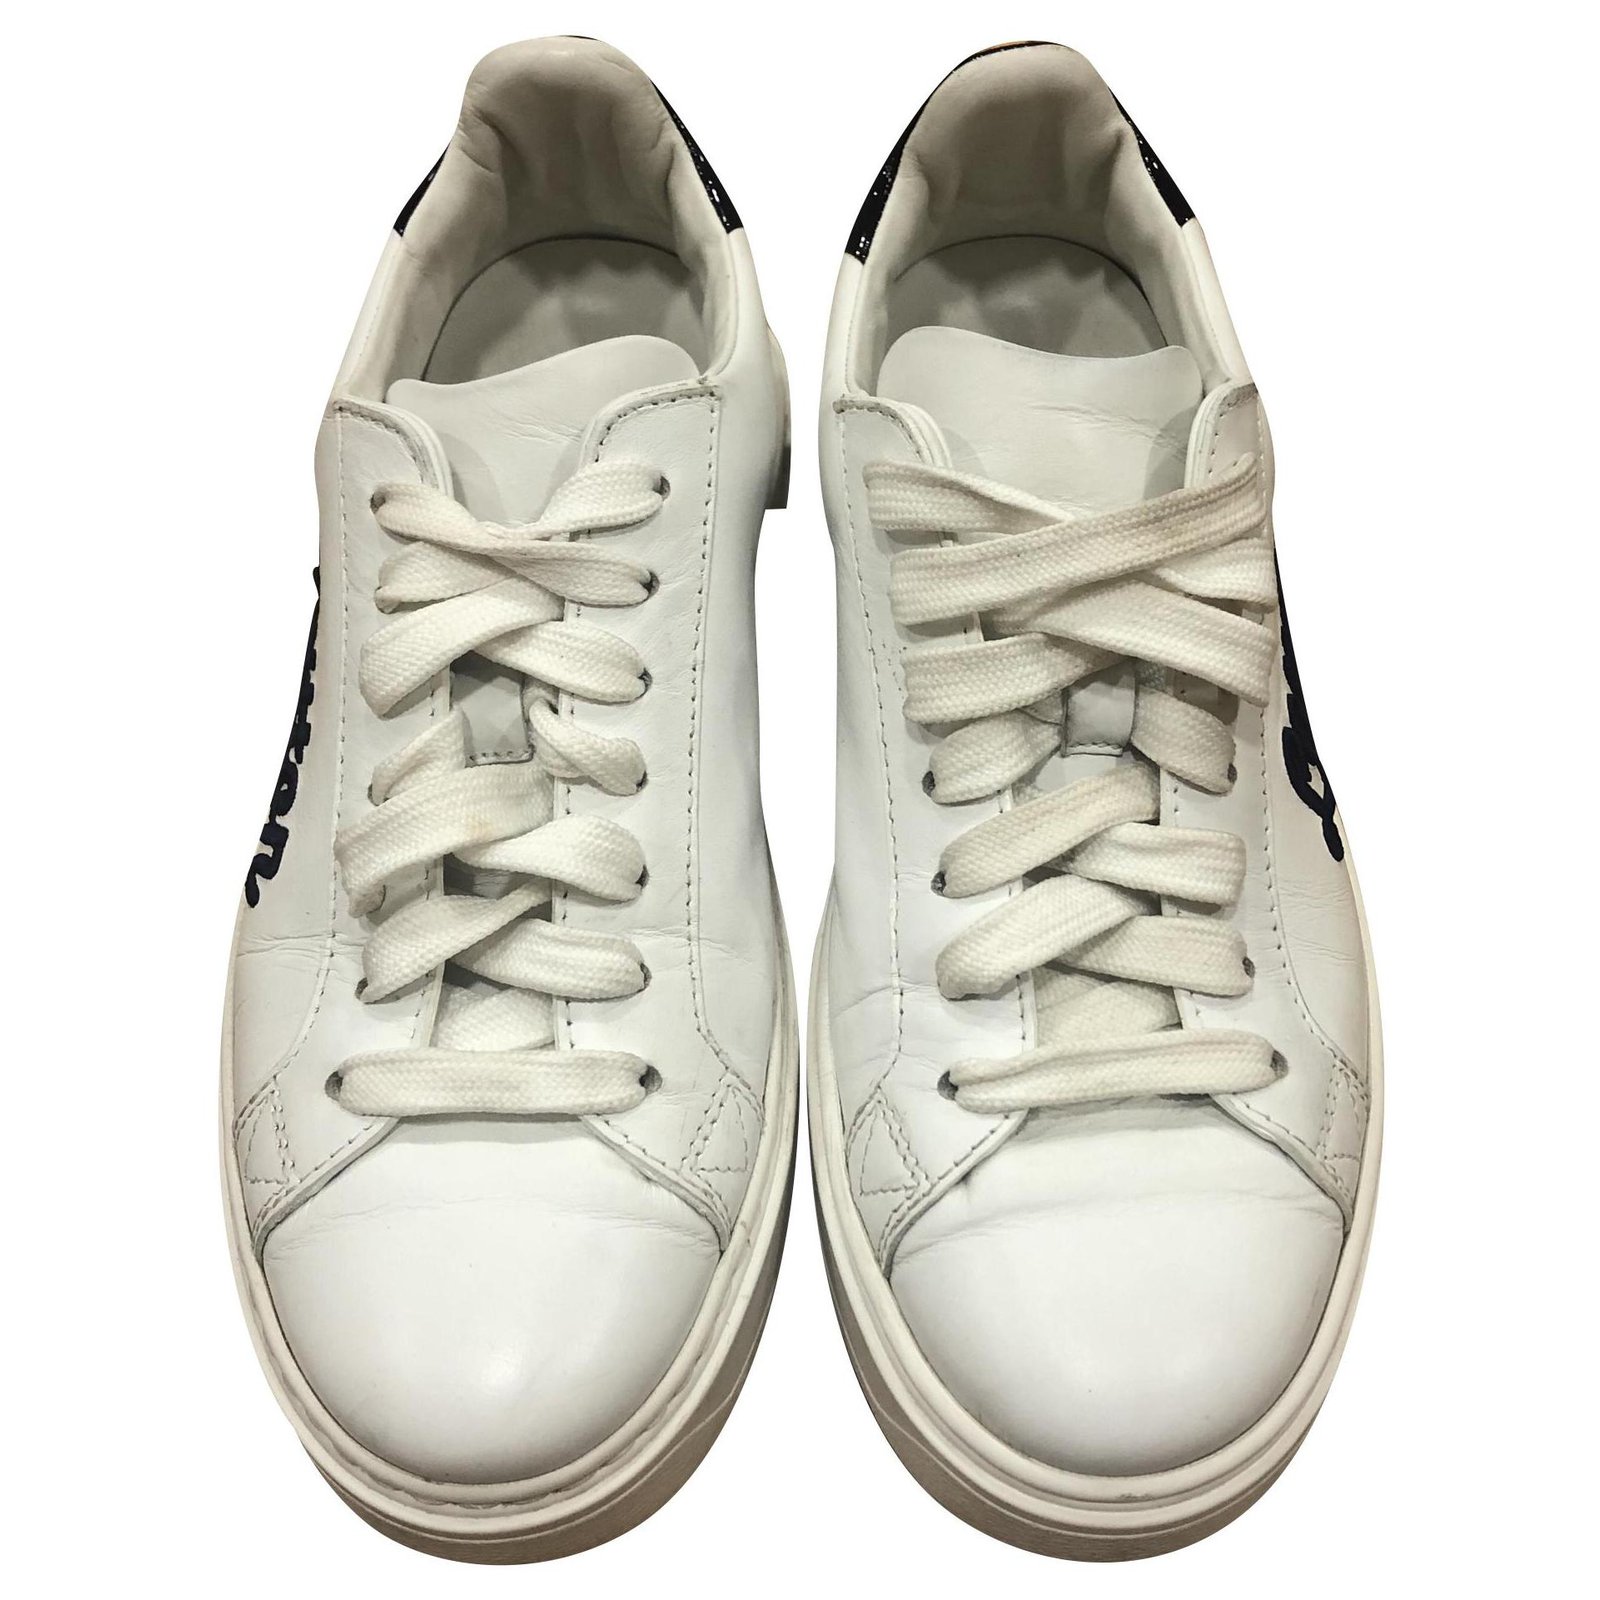 Louis Vuitton White Monogram Embossed Leather Time Out Sneakers Size 39 Louis  Vuitton